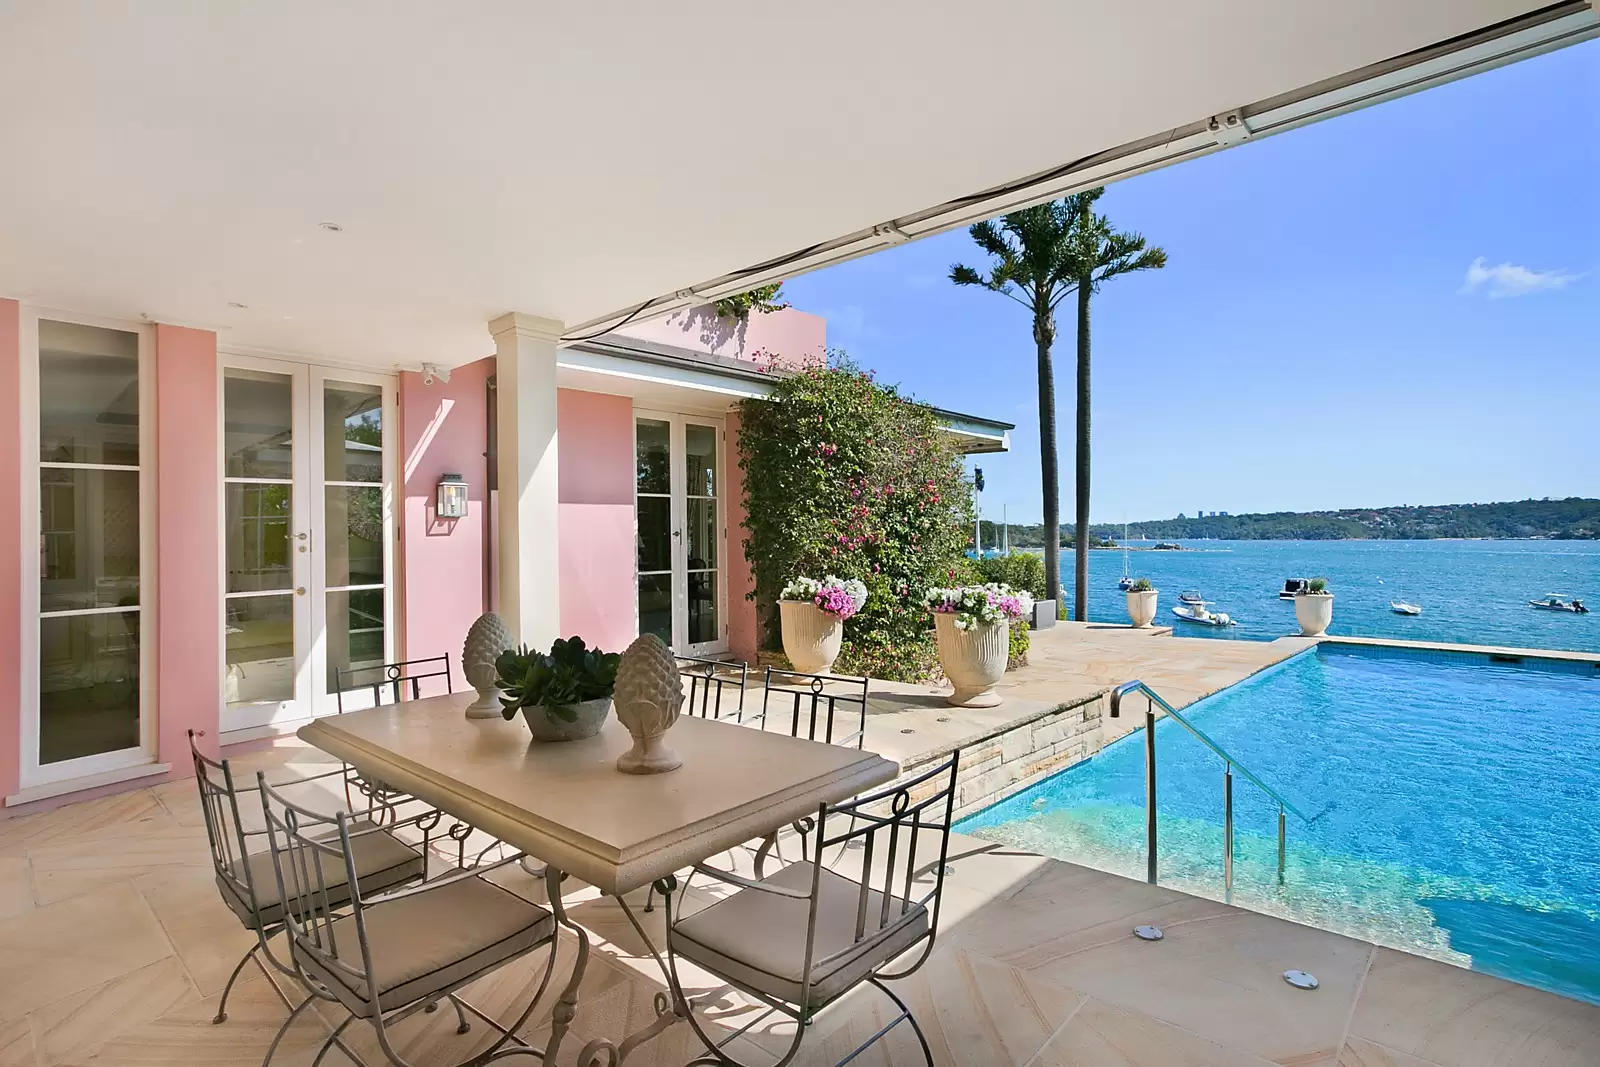 Photo #10: 34 The Crescent, Vaucluse - Sold by Sydney Sotheby's International Realty